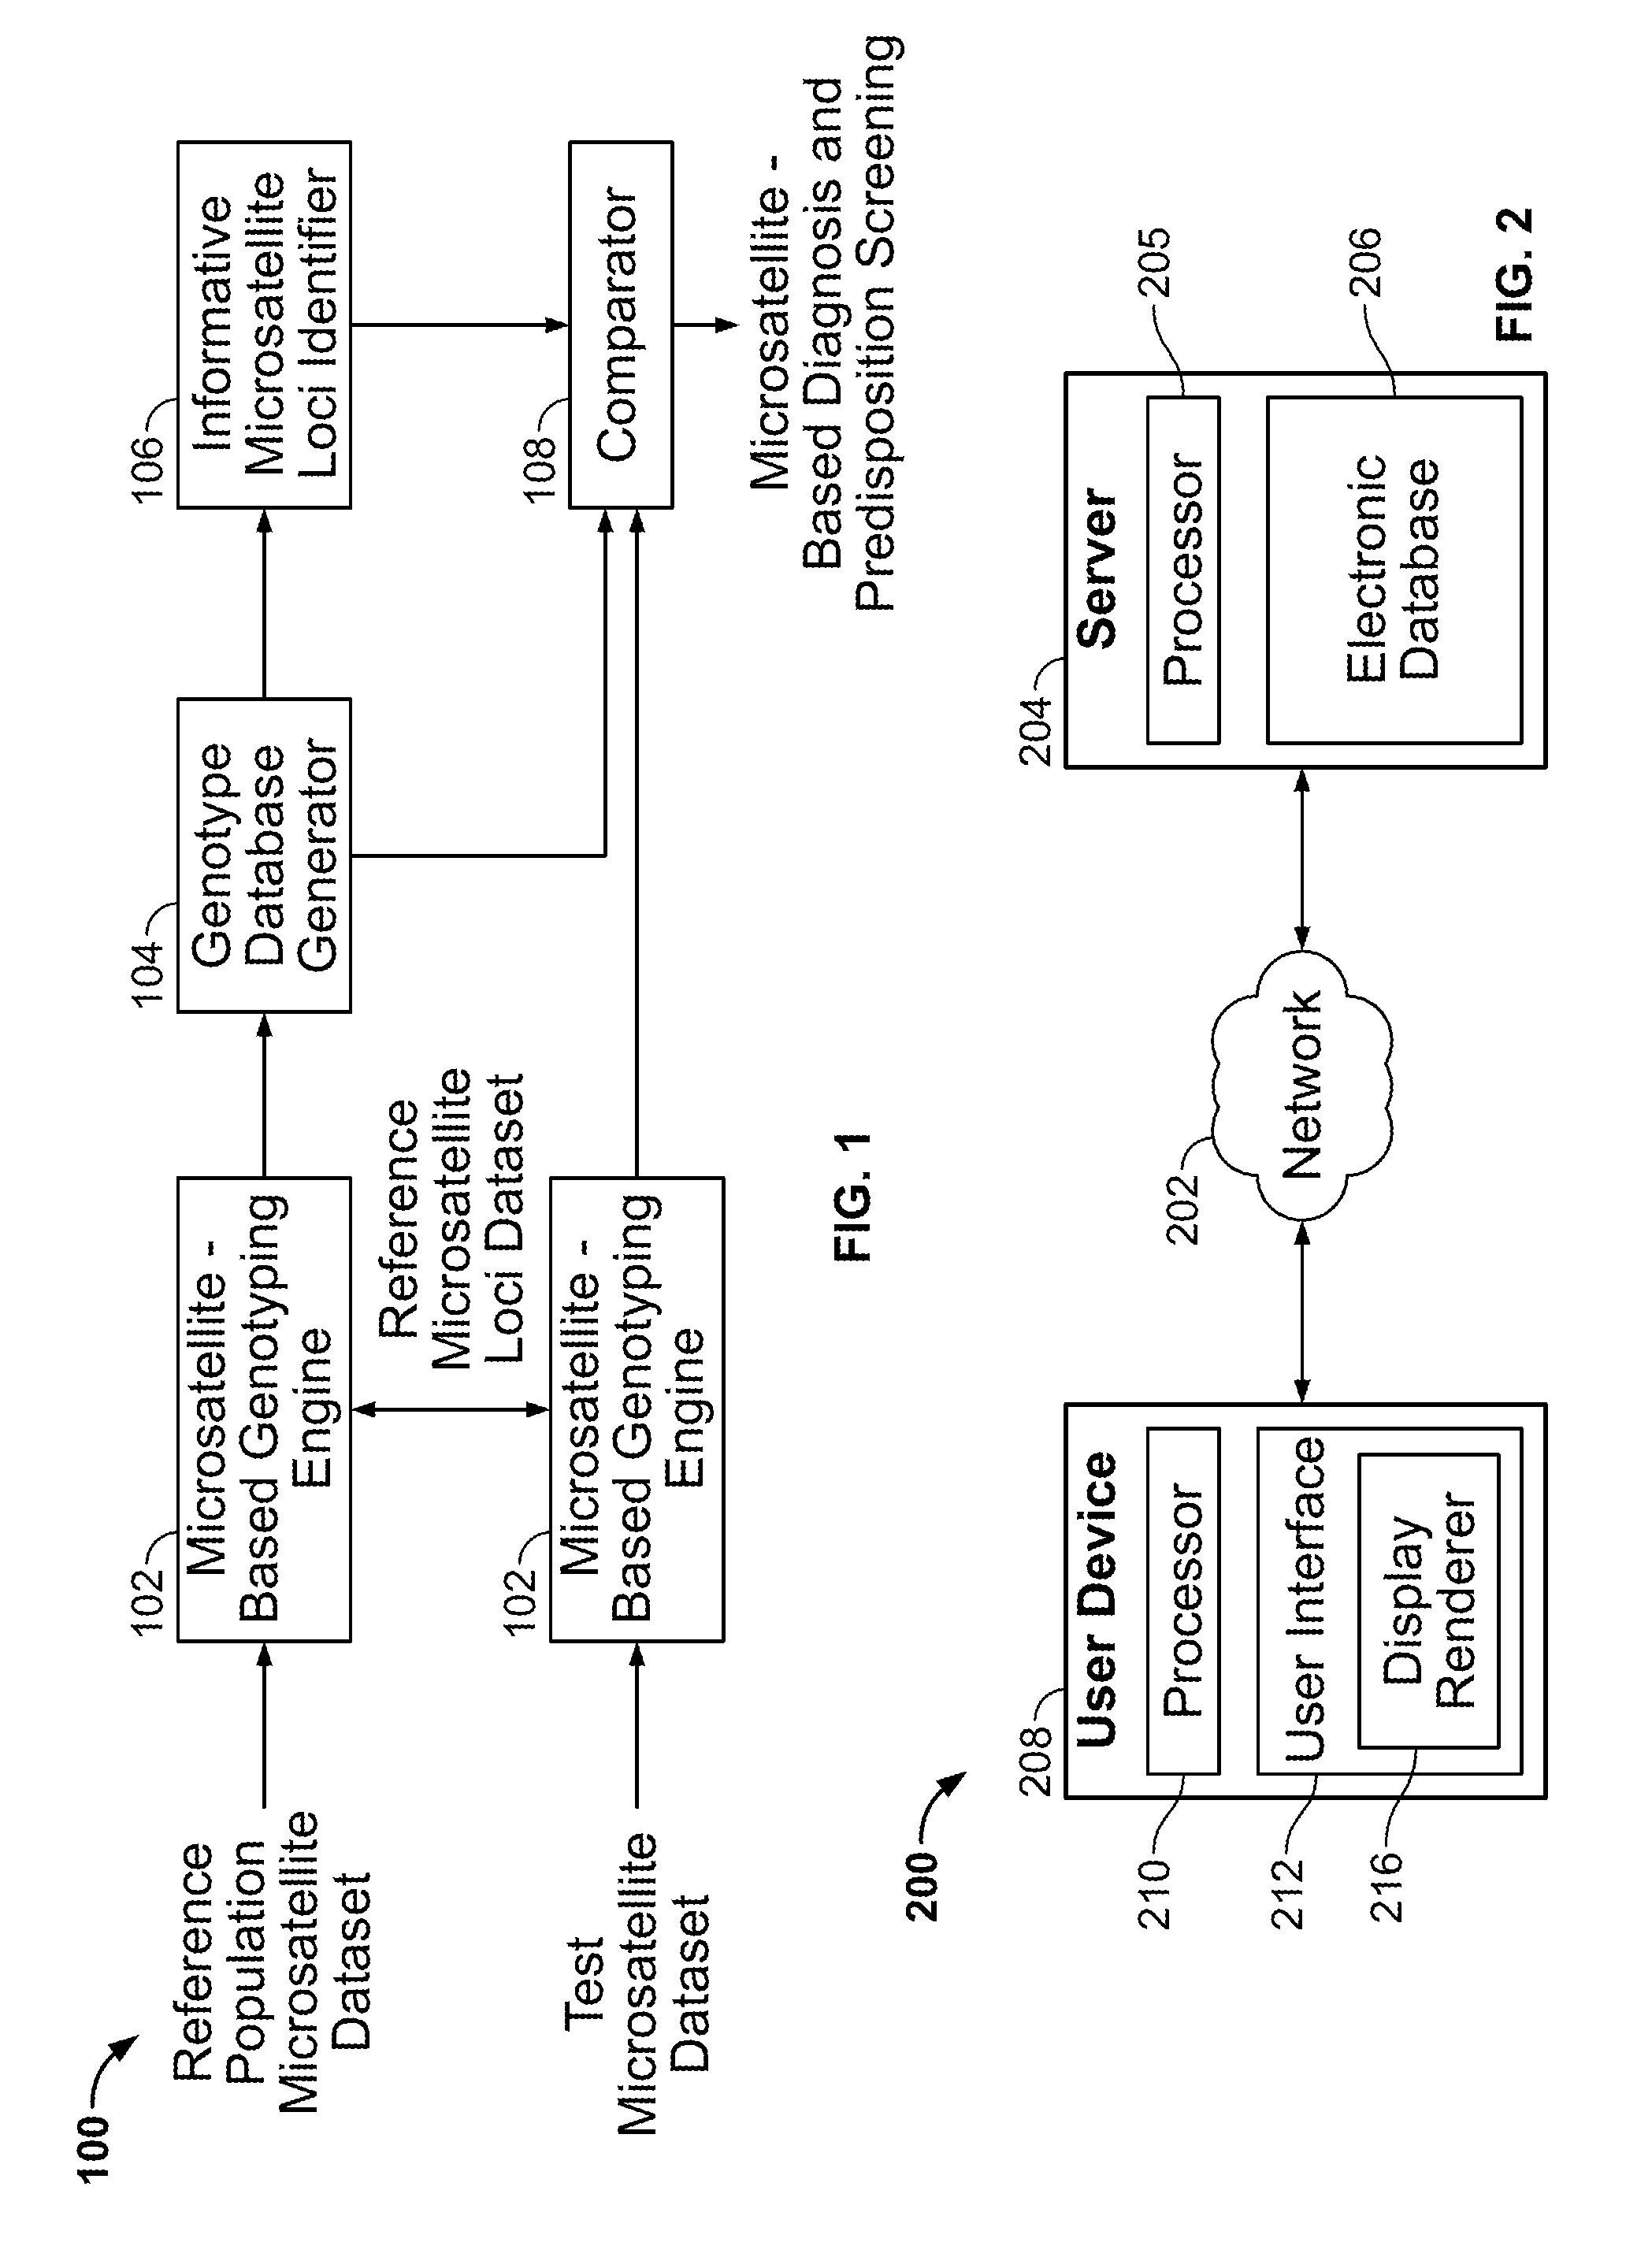 Methods and Compositions for Identifying Global Microsatellite Instability and for Characterizing Informative Microsatellite Loci